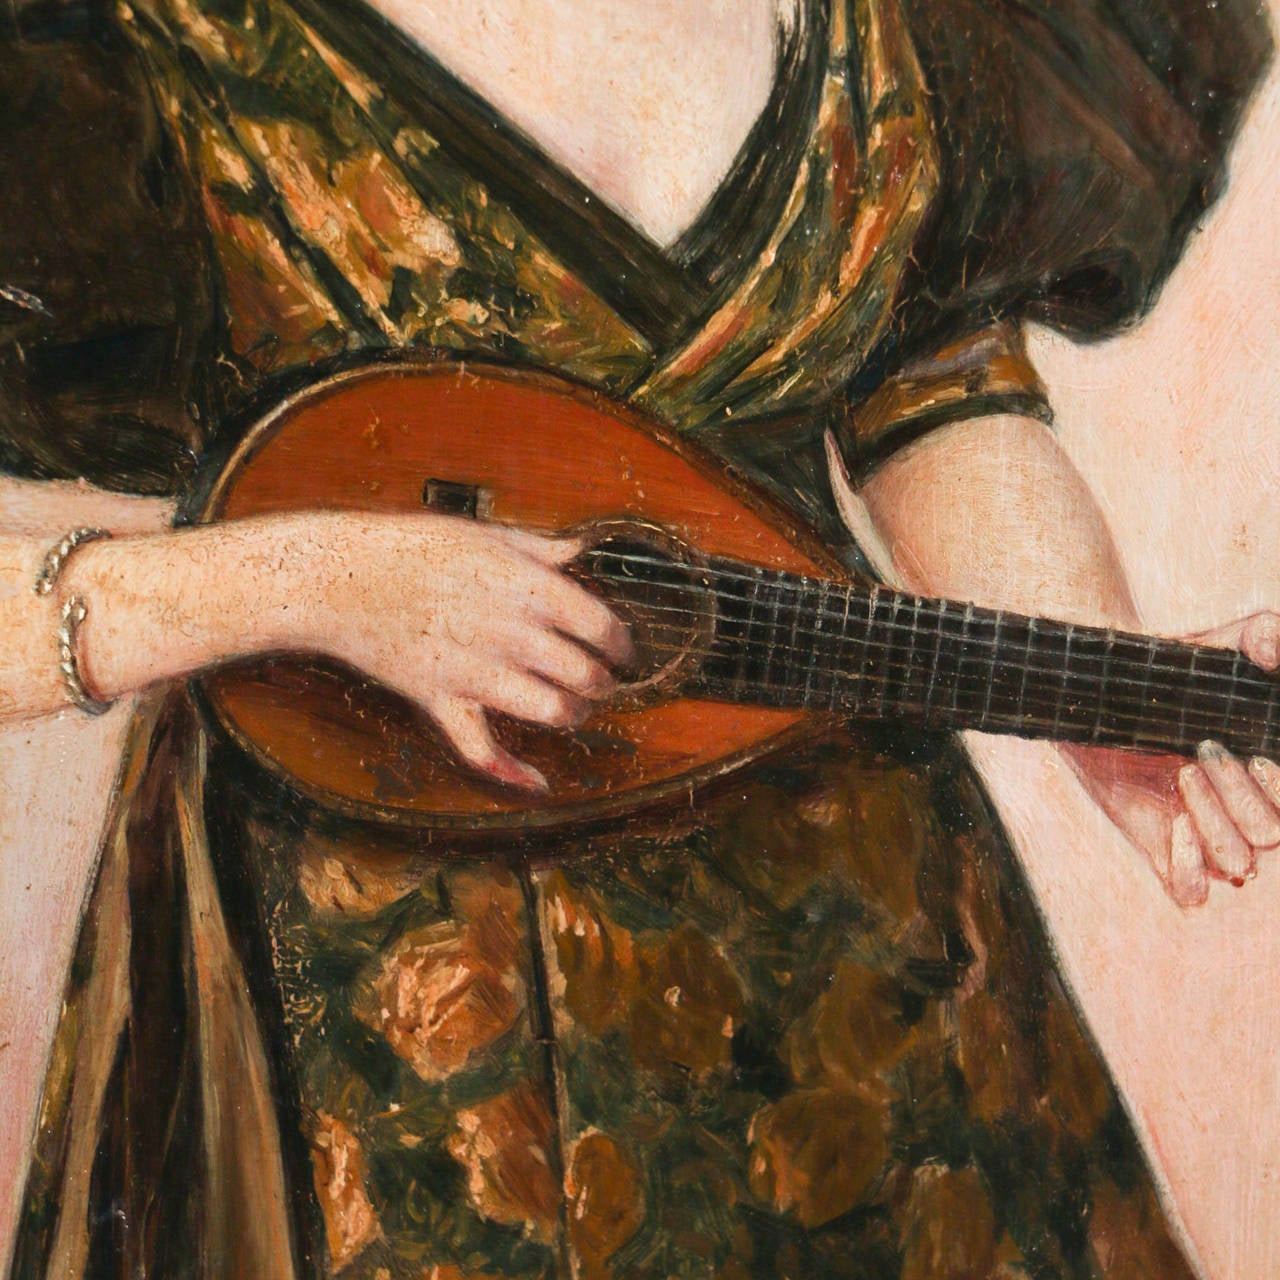 Danish Original Oil on Wood Painting of Young Woman Playing Musical Instrument